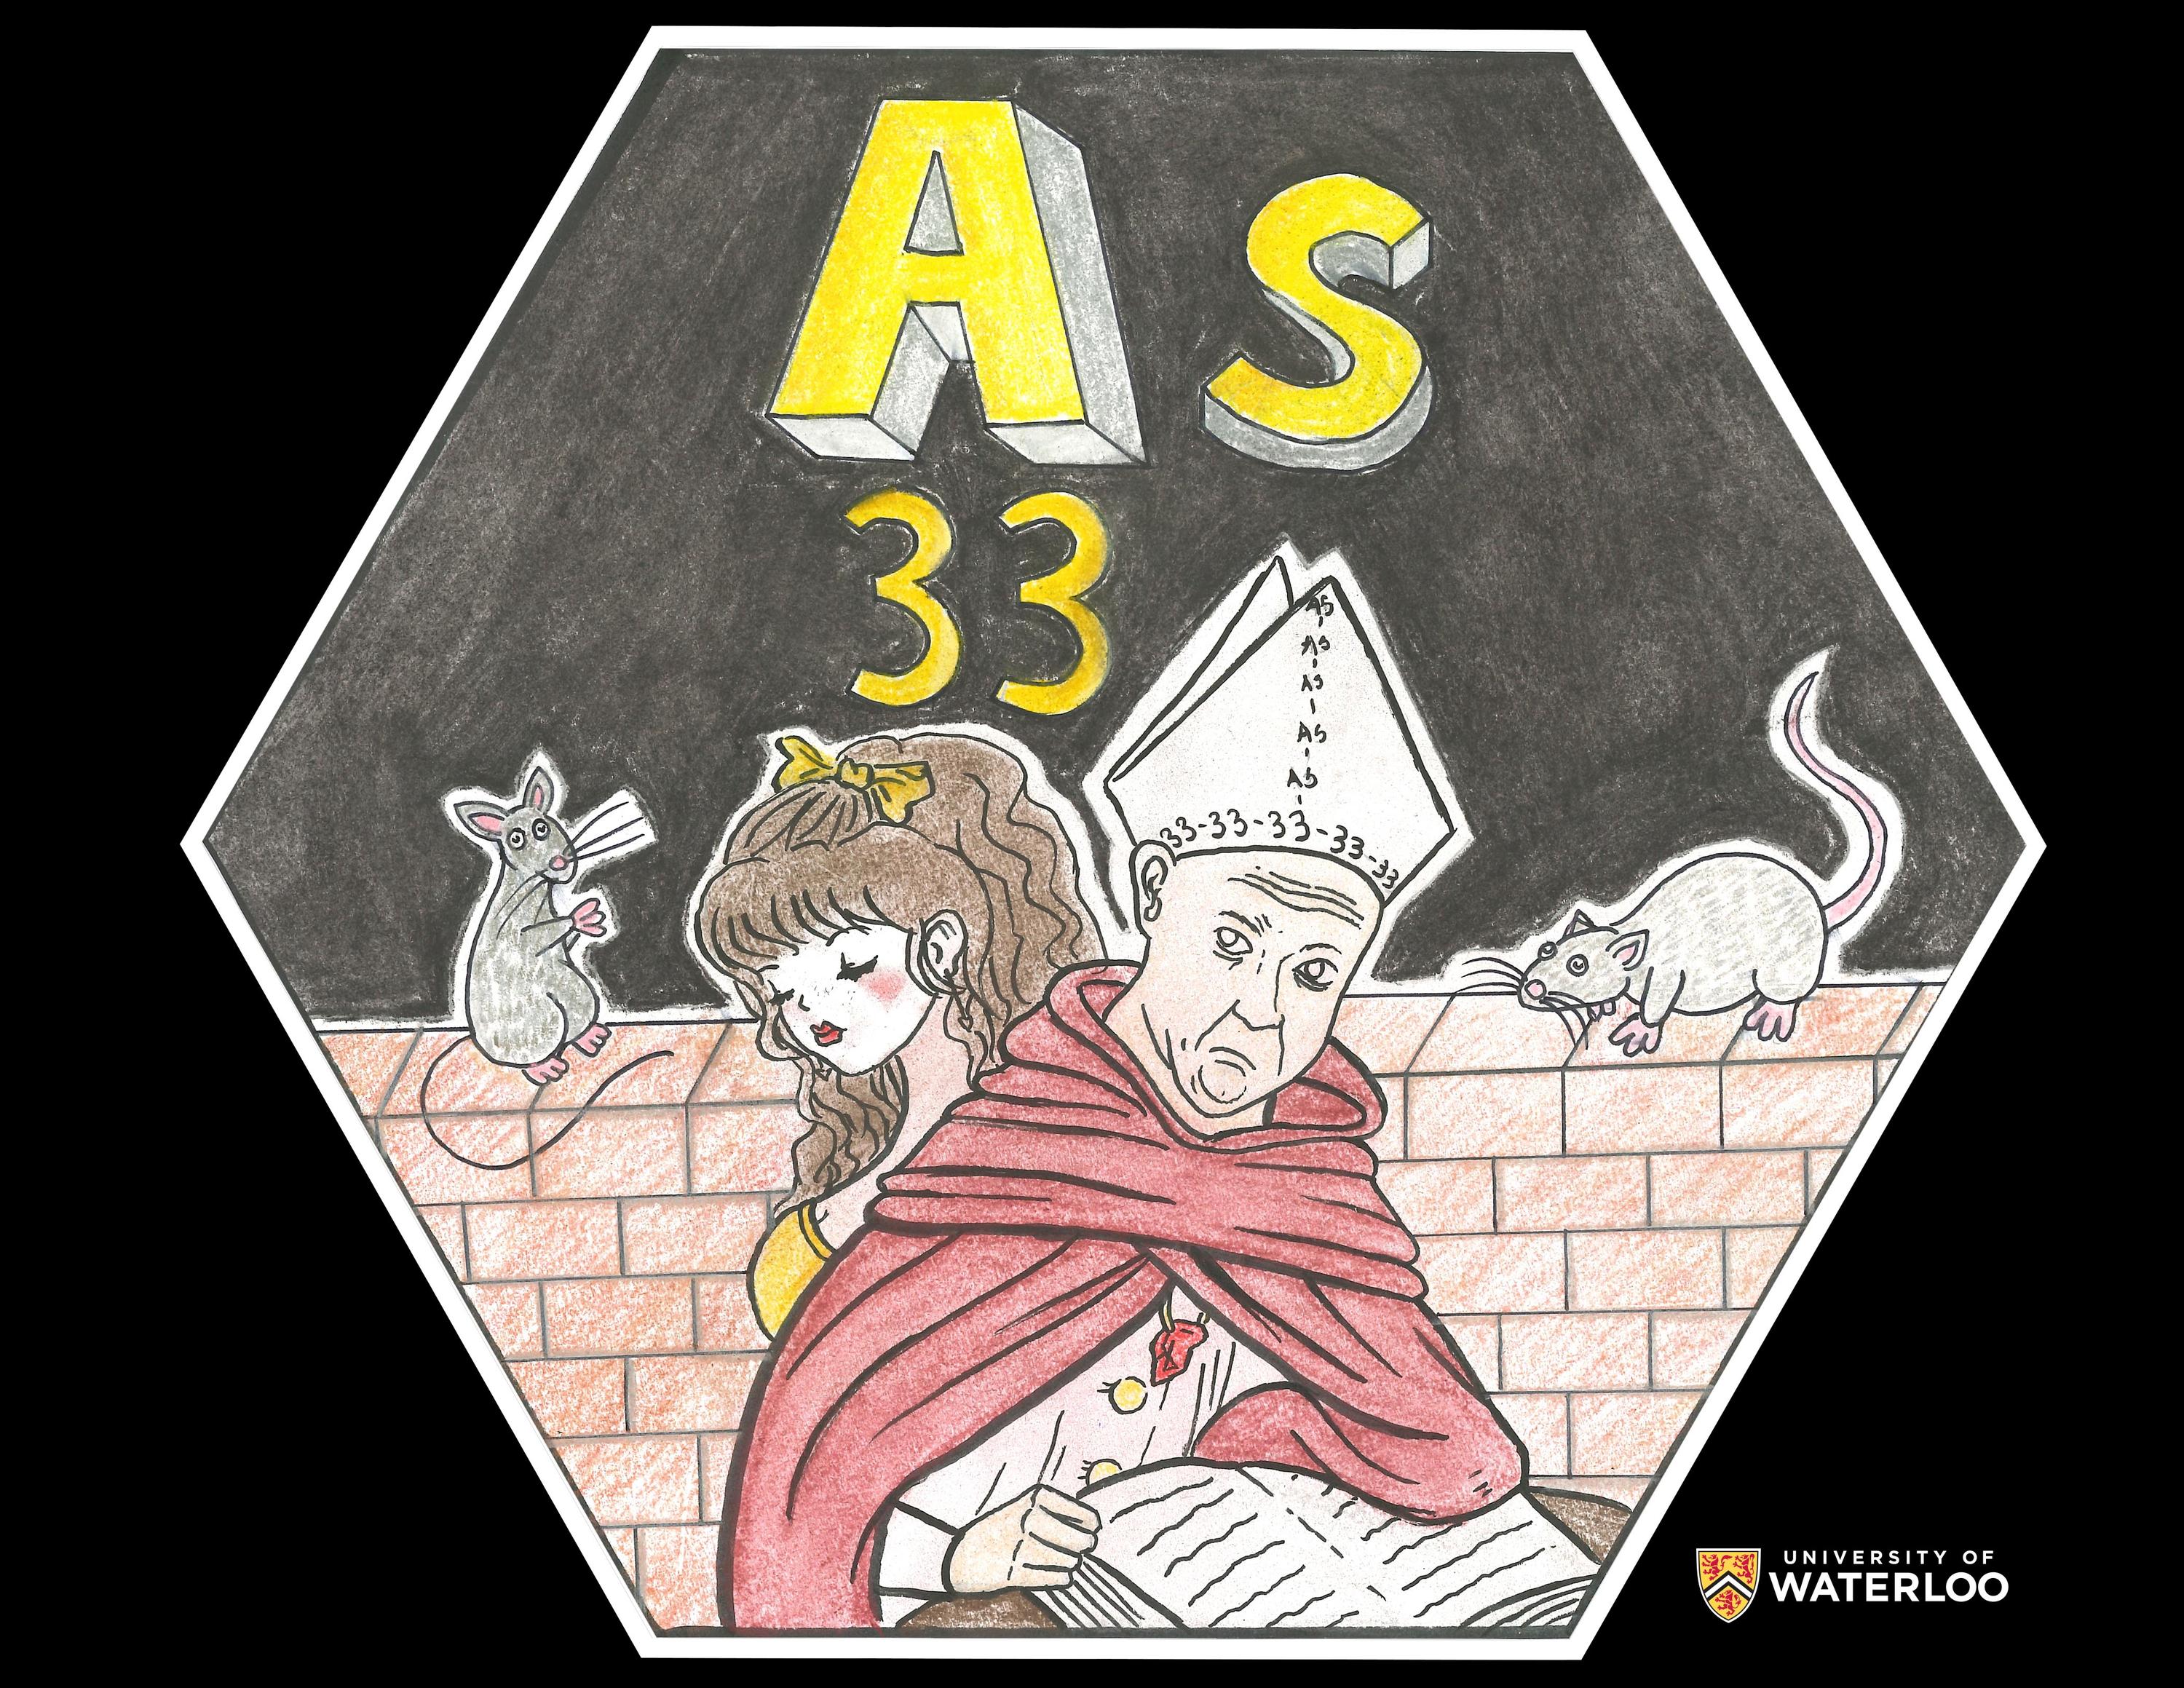 Ink and coloured pencil on black paper. Centre is a portrait of Saint Albertus Magnus reading a book with a rosy-cheeked, demure Victorian lady behind him. Background shows two rats running on top of a brick wall. Above is the chemical symbol “As” and atomic number “33” in yellow.